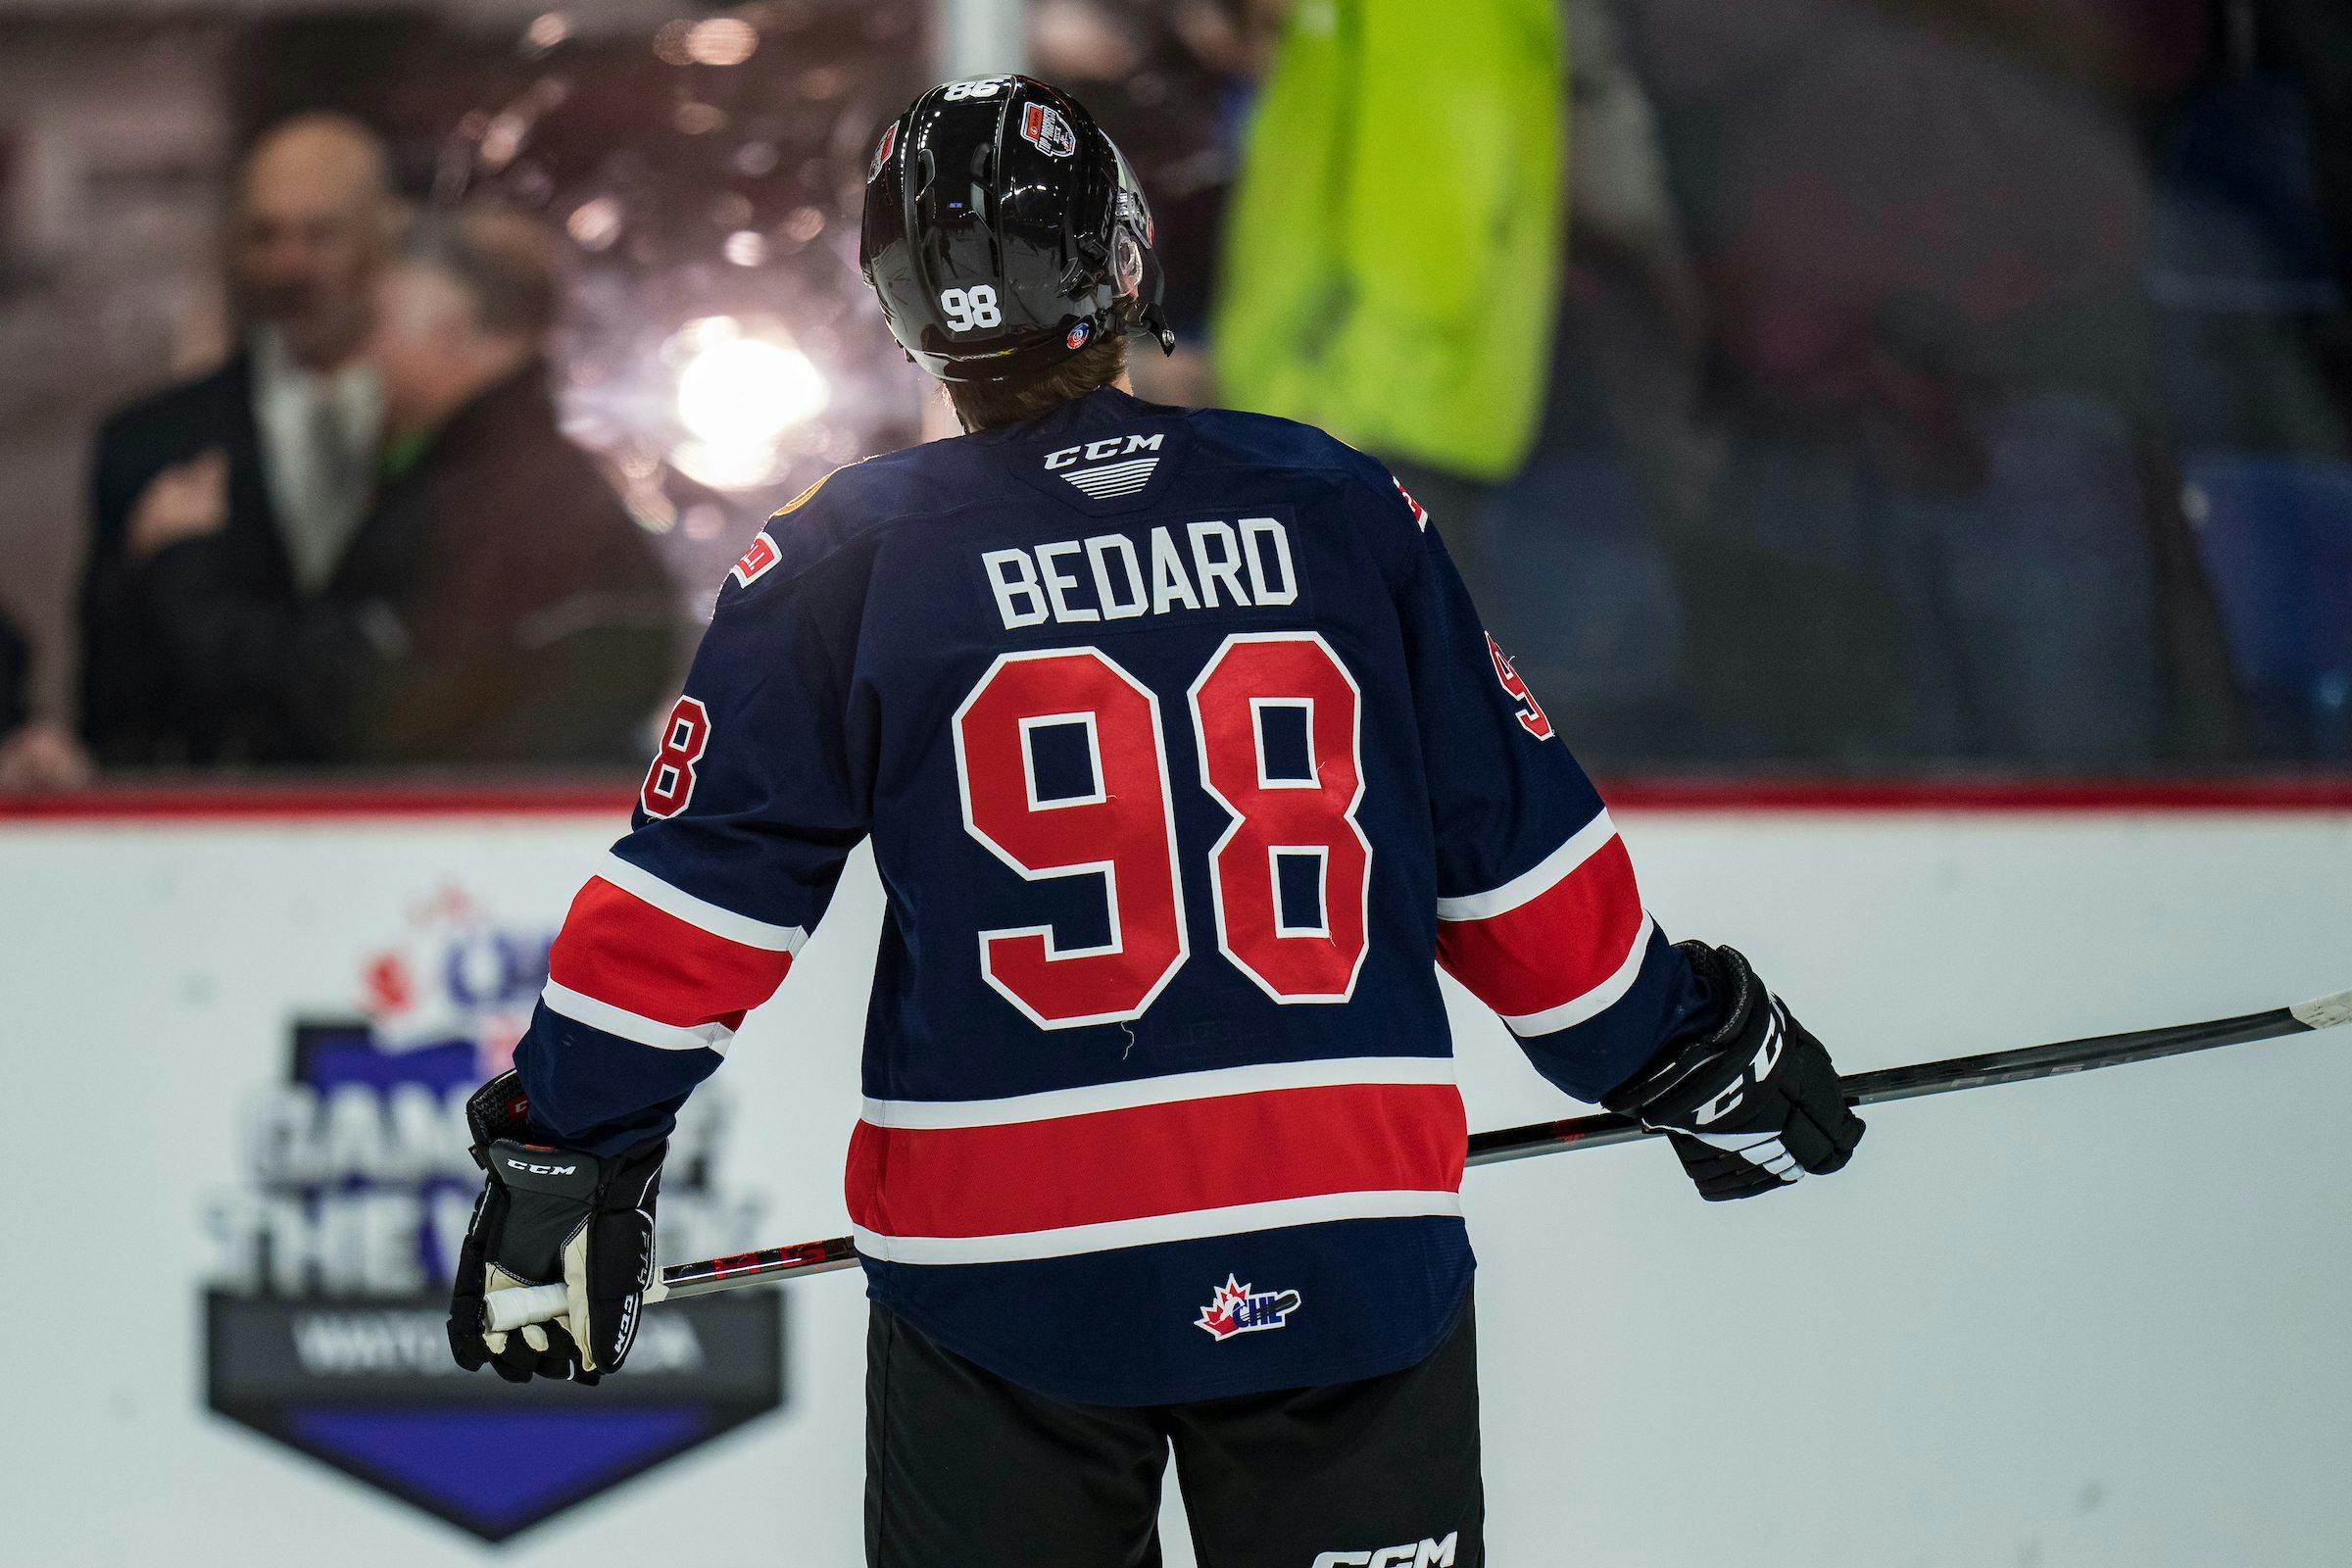 Connor Bedard, as expected, taken first in the NHL draft by the